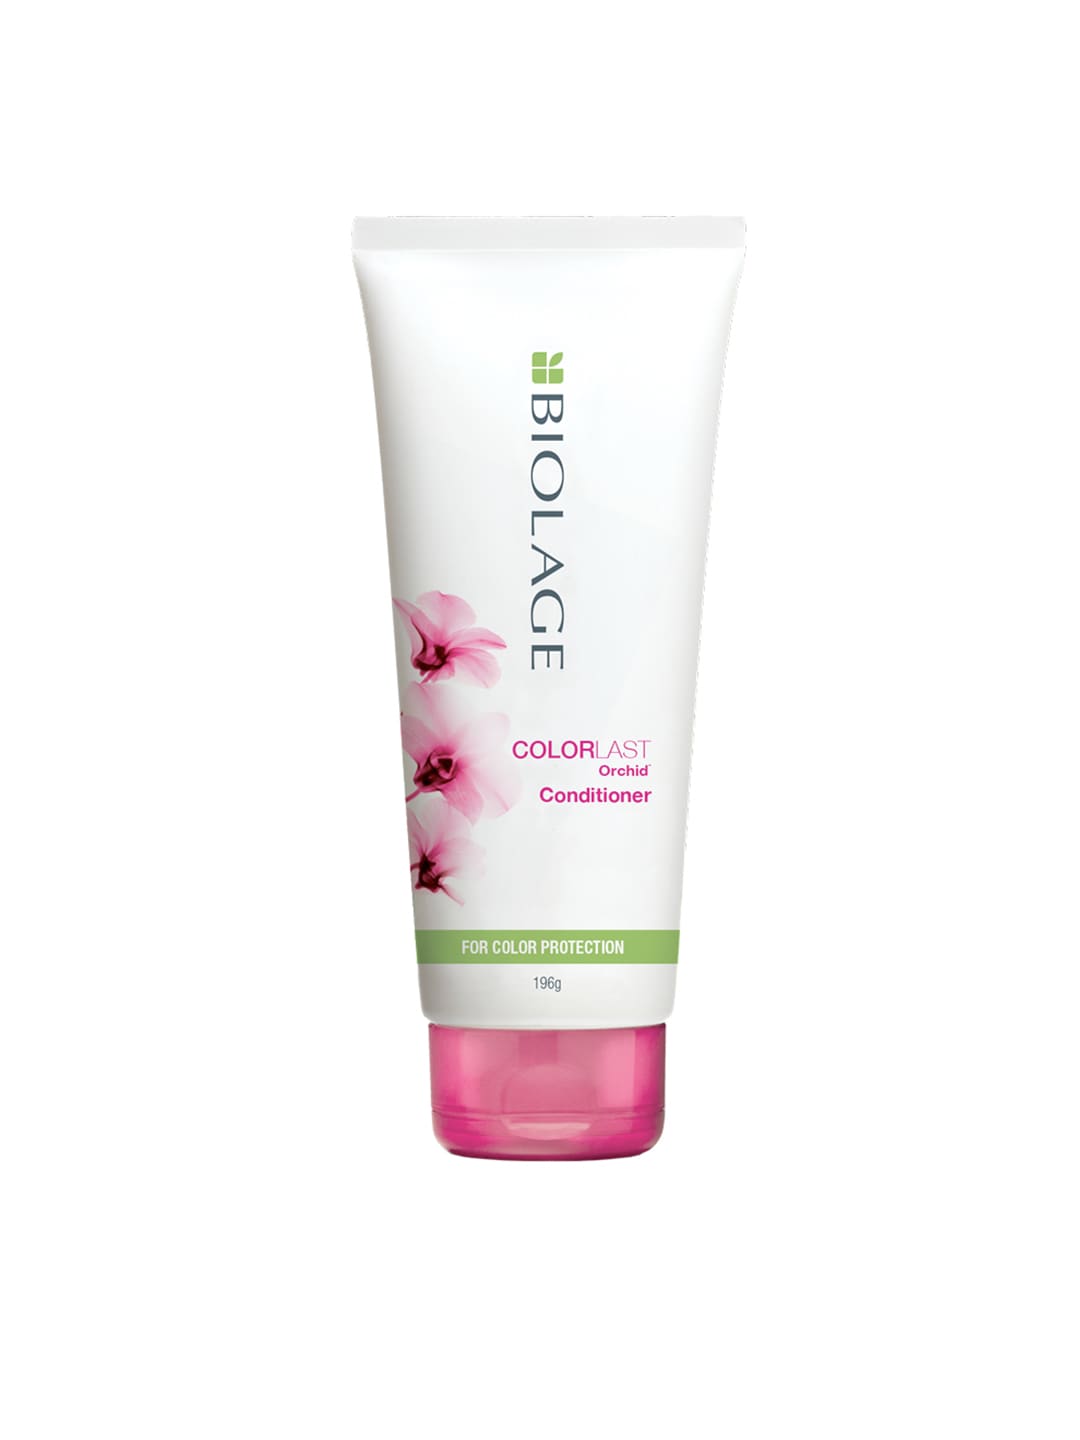 Biolage Color Last Orchid Conditioner for Color Protection - 196 g Price in India